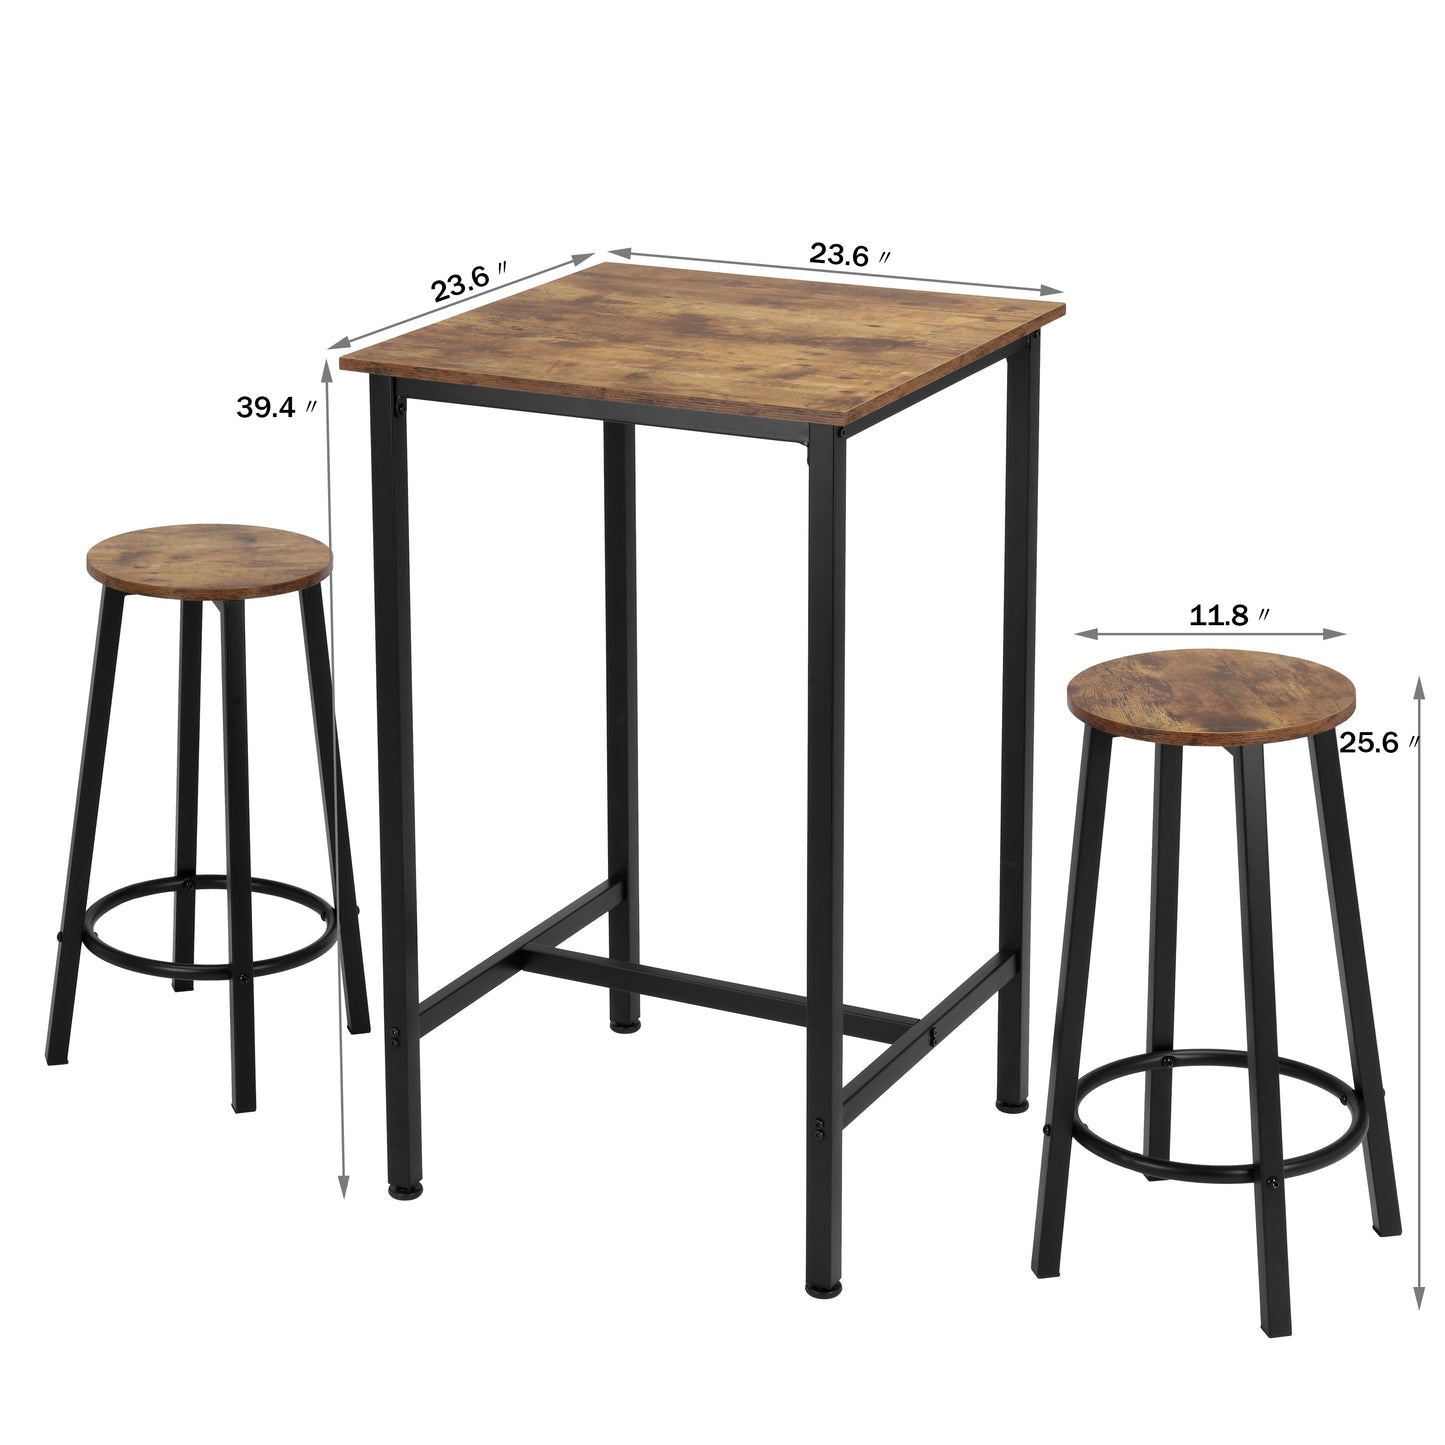 Finnhomy Bar Table Set, 23.6" Pub Table High Top Table, Square Bar Height Table, Bar Table with Stools, Kitchen Table Set for 2, Dining Table Set, Breakfast for Kitchen, Living Room, Rustic Brown,F20TBBTSSR7264